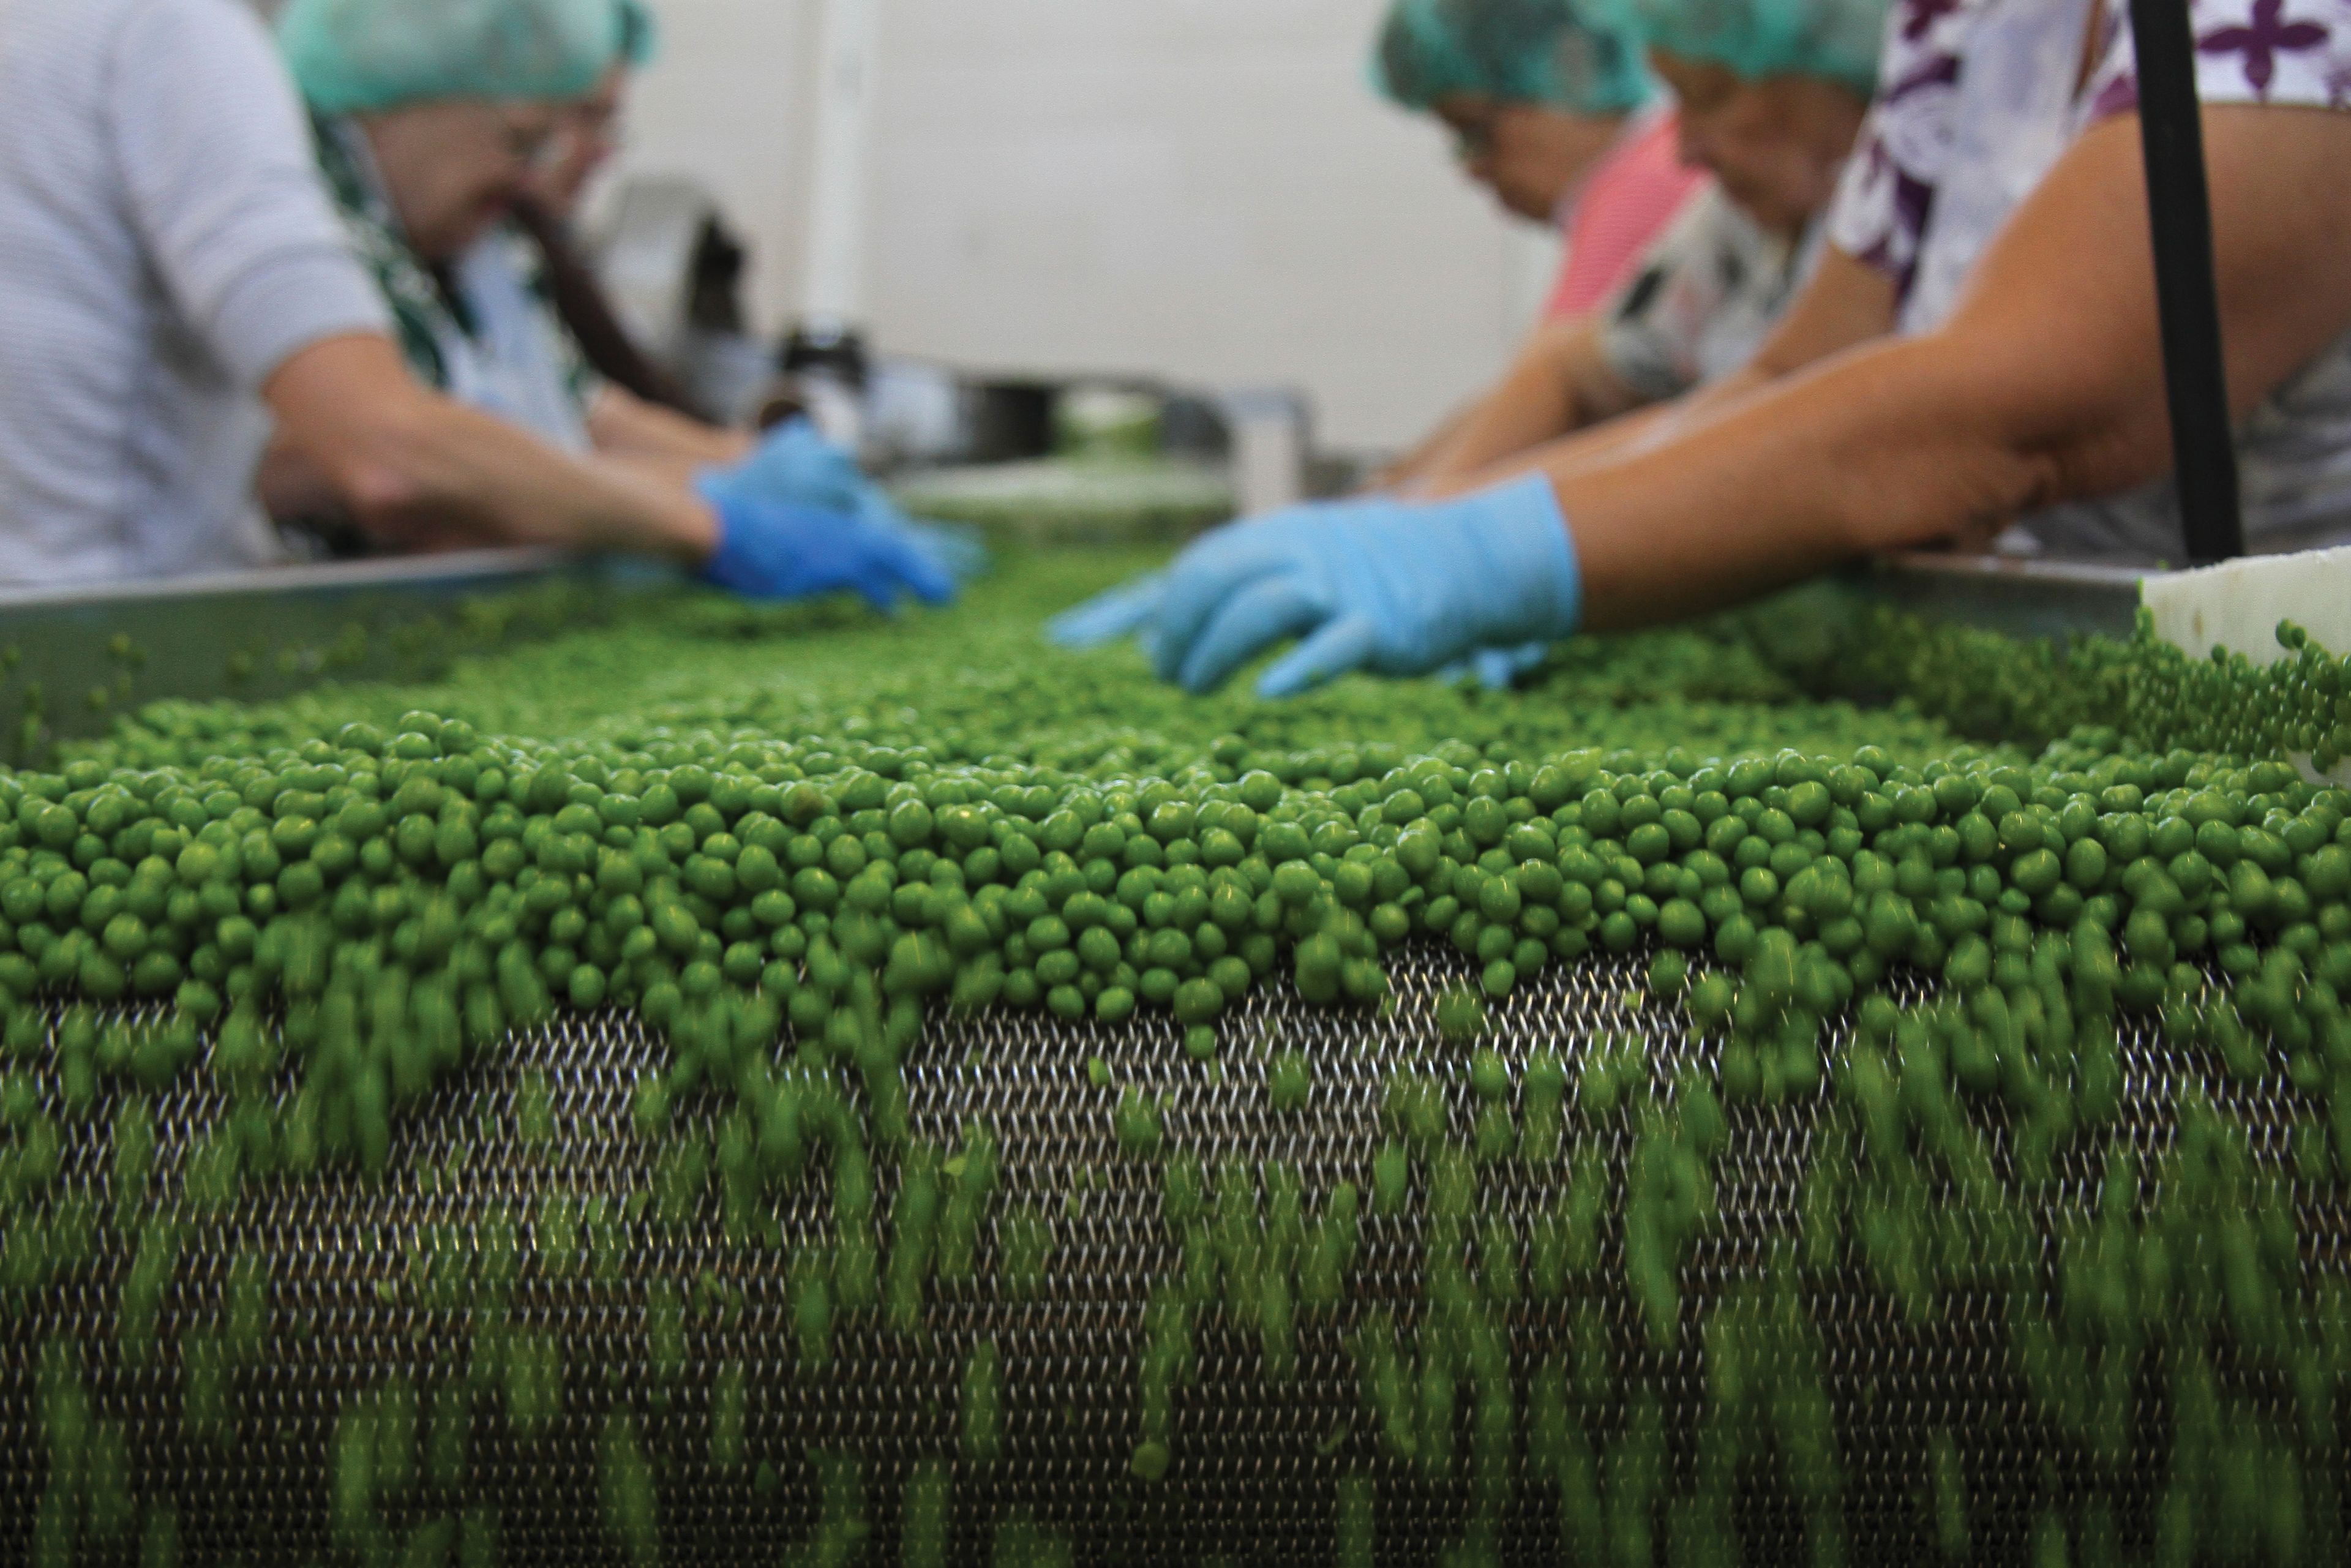 Volunteers help can peas at a cannery.